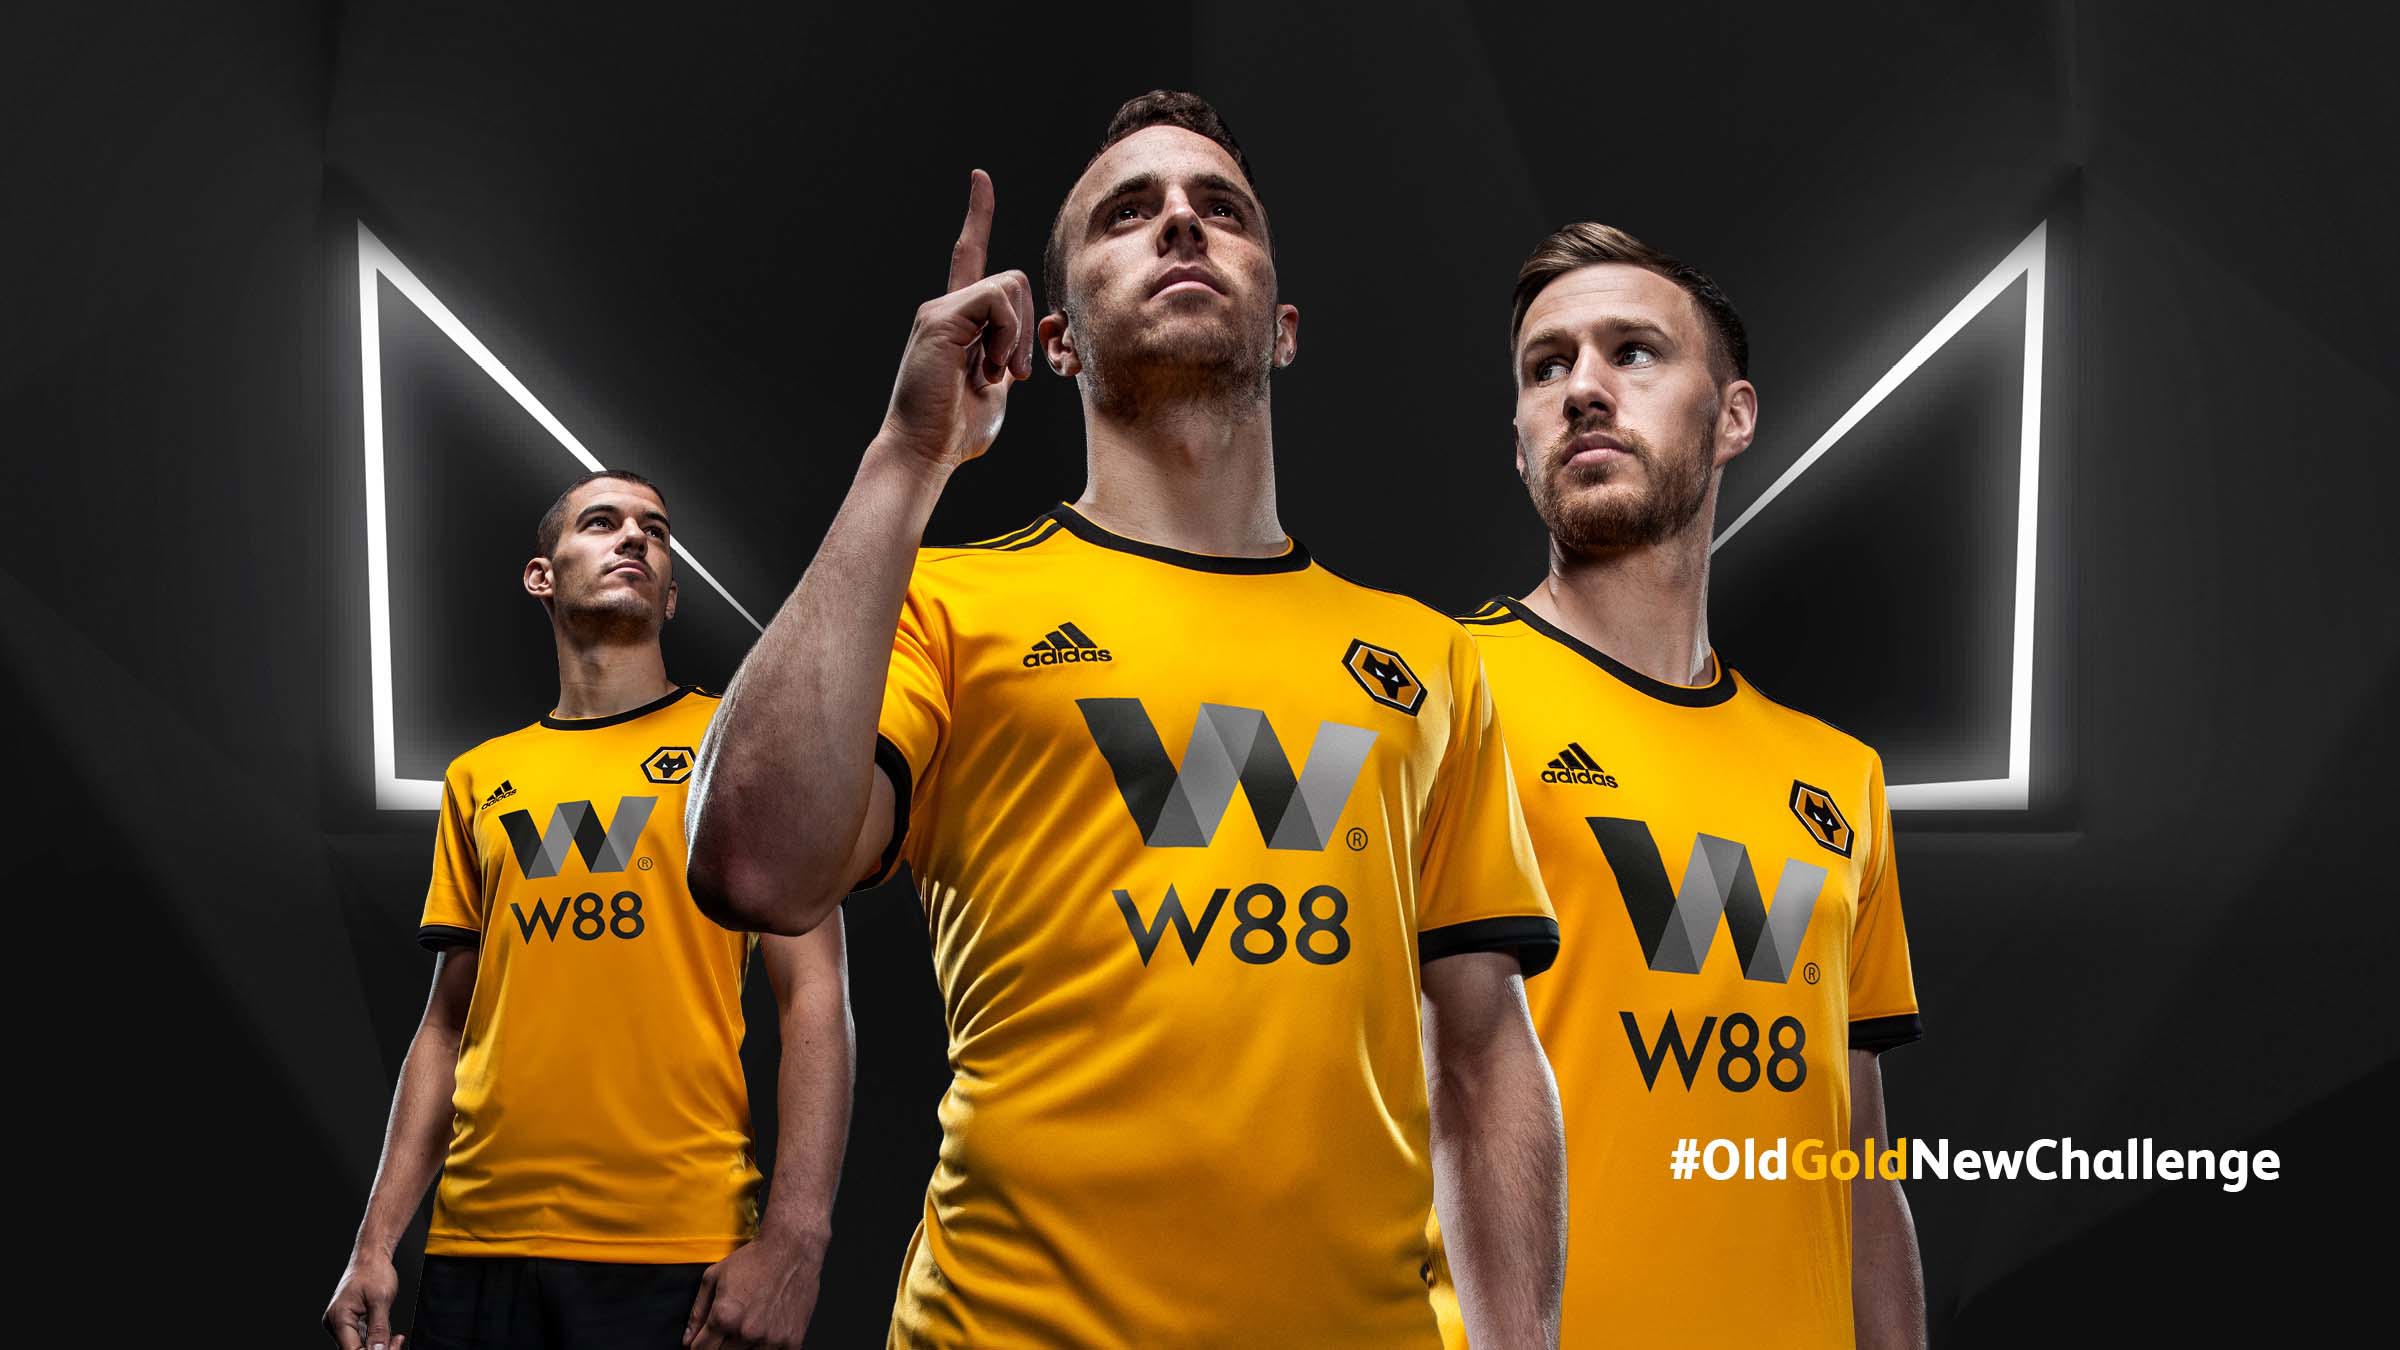 Parity > wolves soccer team jersey, Up to 69% OFF